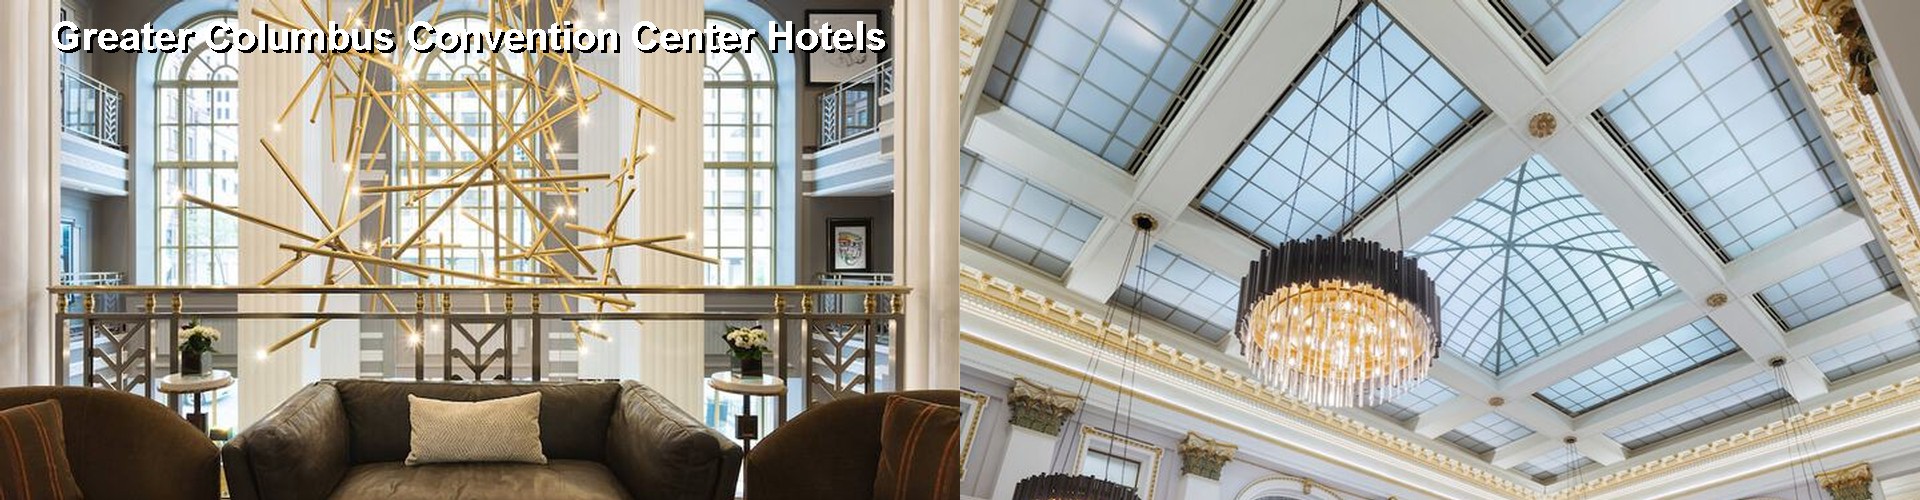 5 Best Hotels near Greater Columbus Convention Center